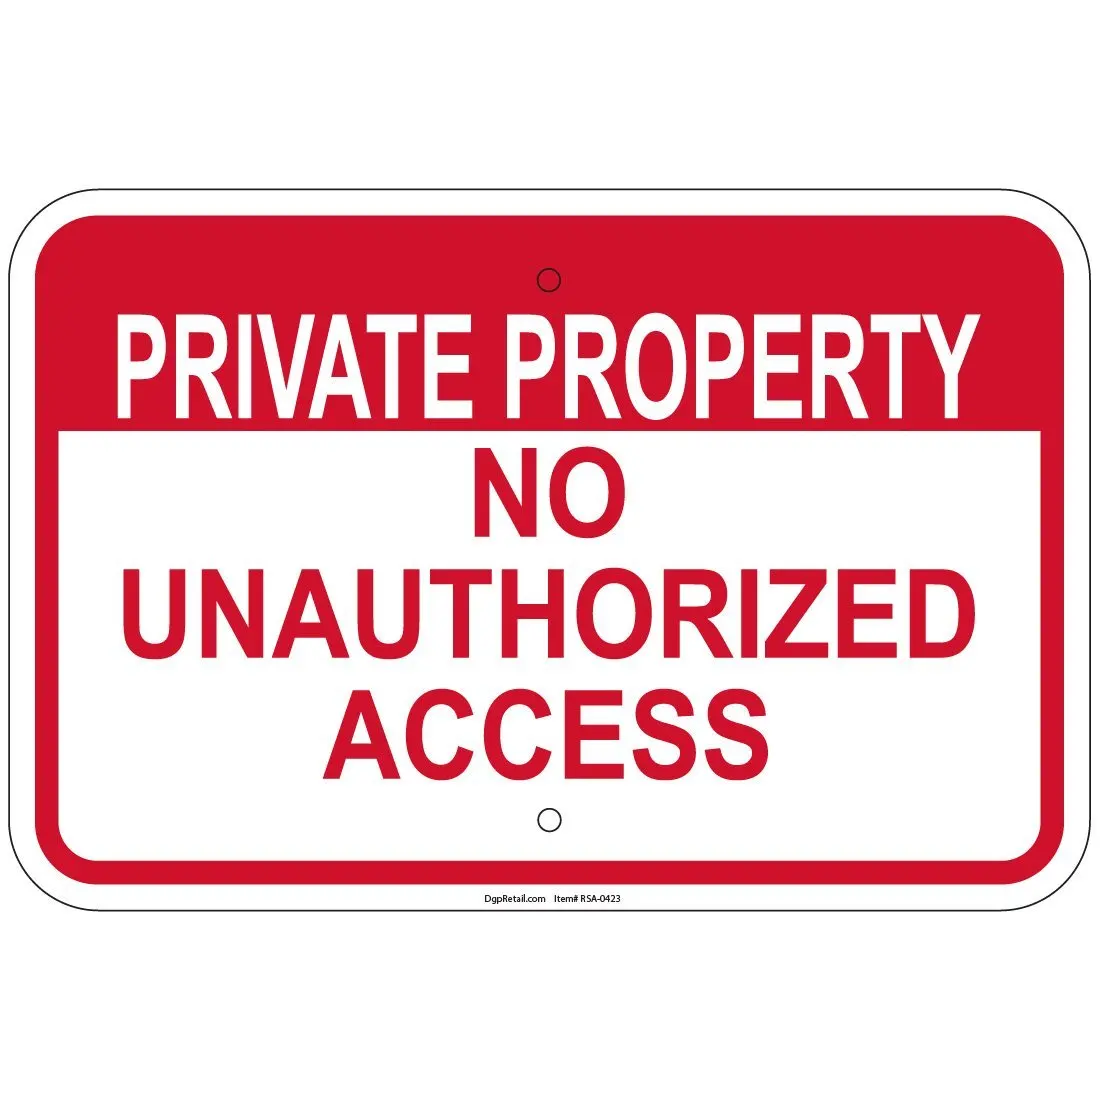 Access 12. Unauthorized access. Unauthorized access is prohibited. Private property. Private property do not access.